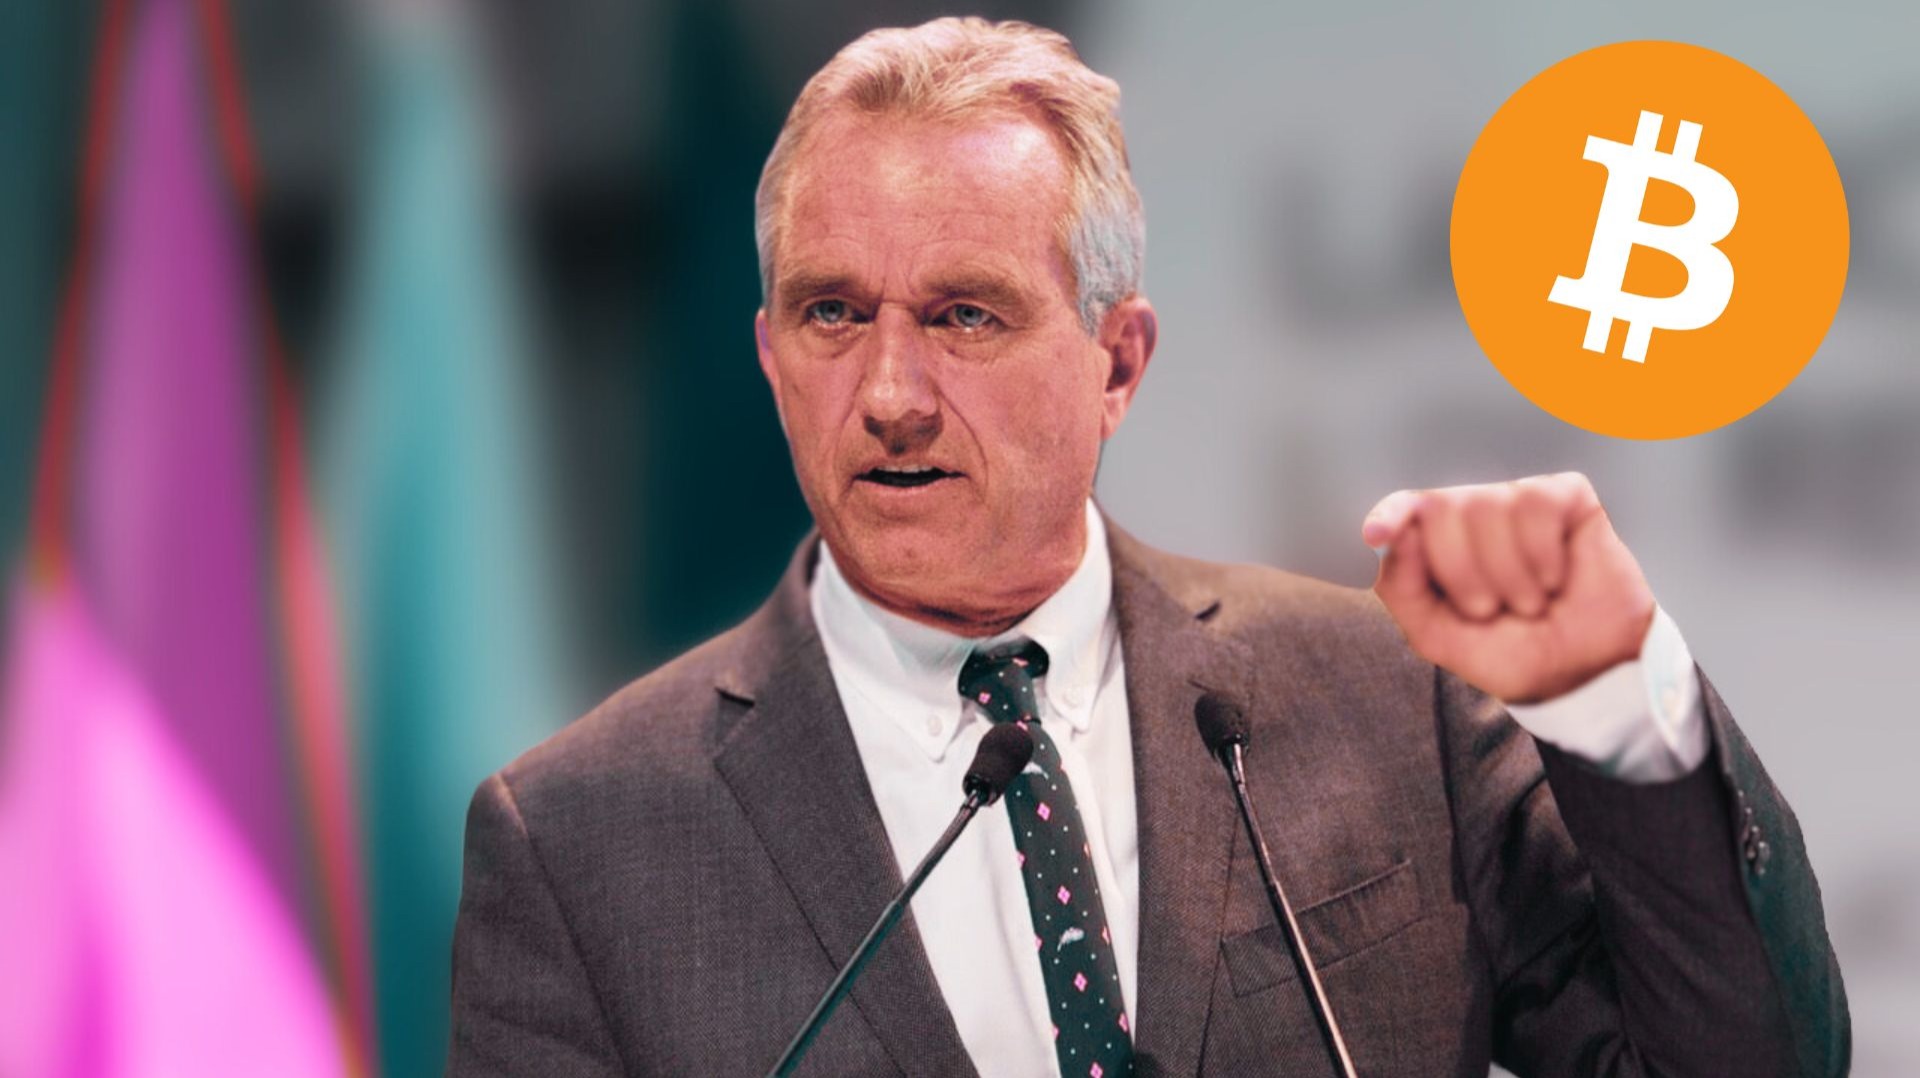 RFK Jr. Champions Pro-BTC Policies as Presidential Candidate